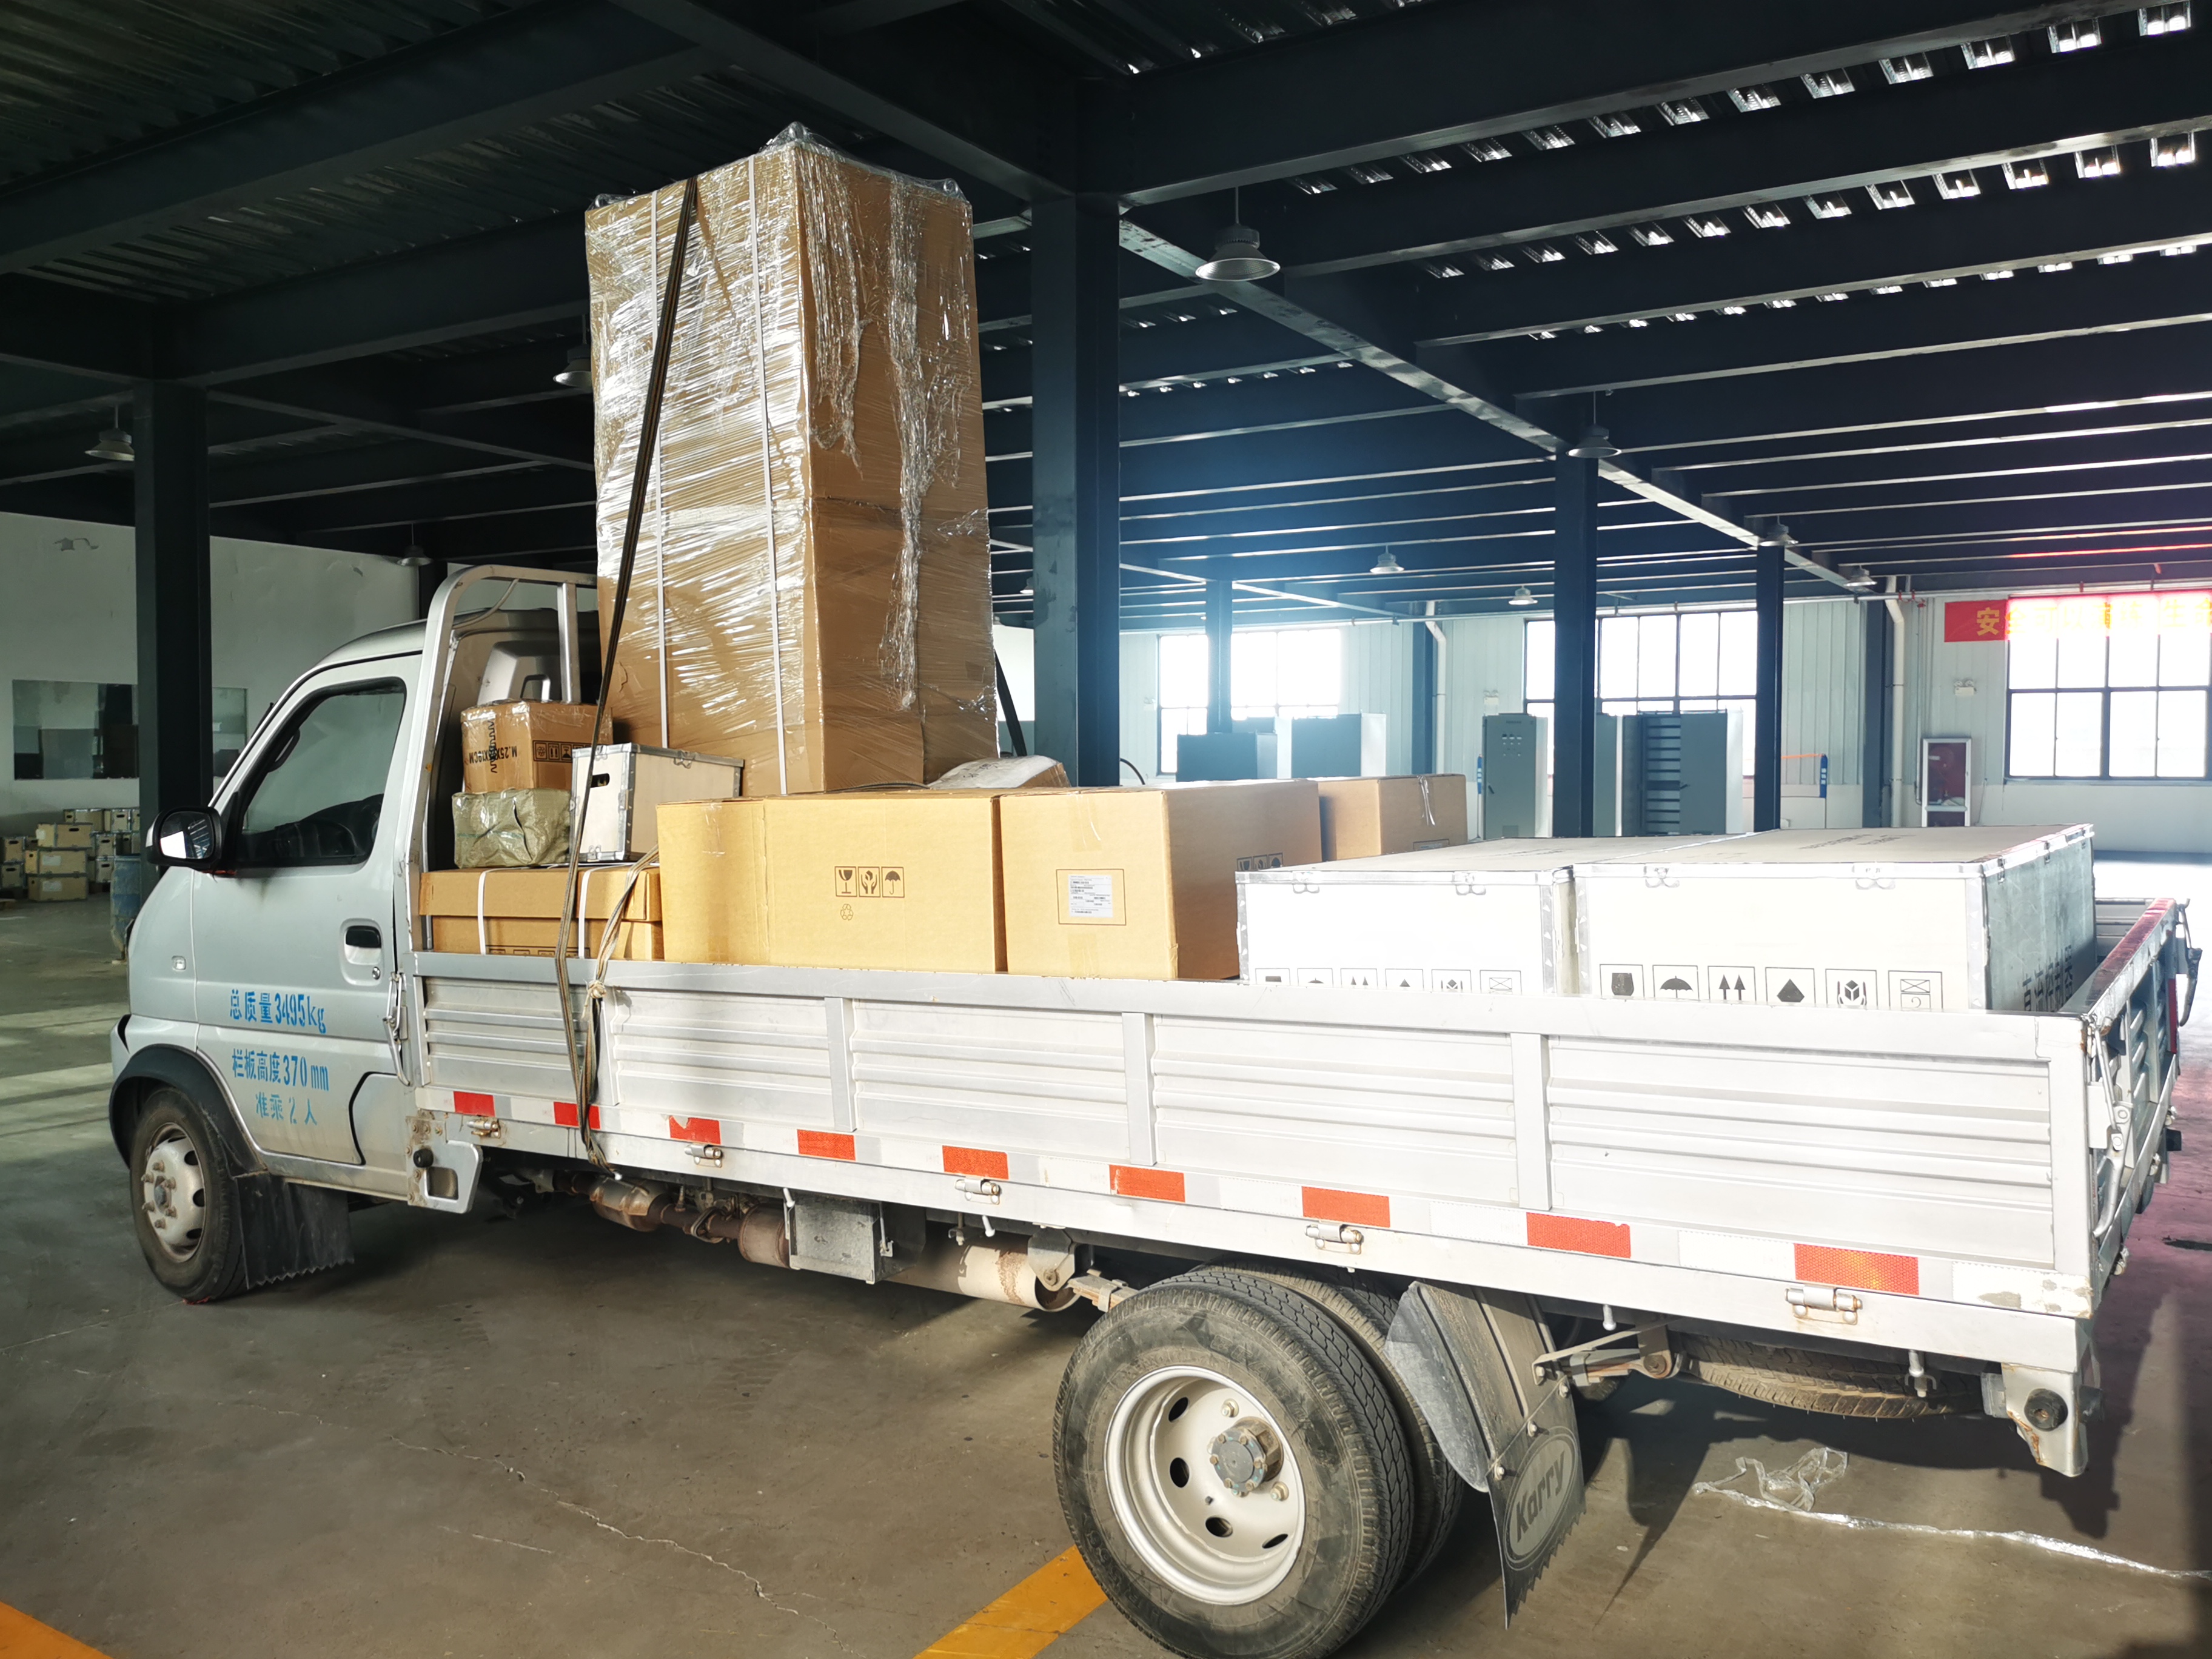 Shanghai Renkong DC Drive manufacturer take a look at our daily delivery!